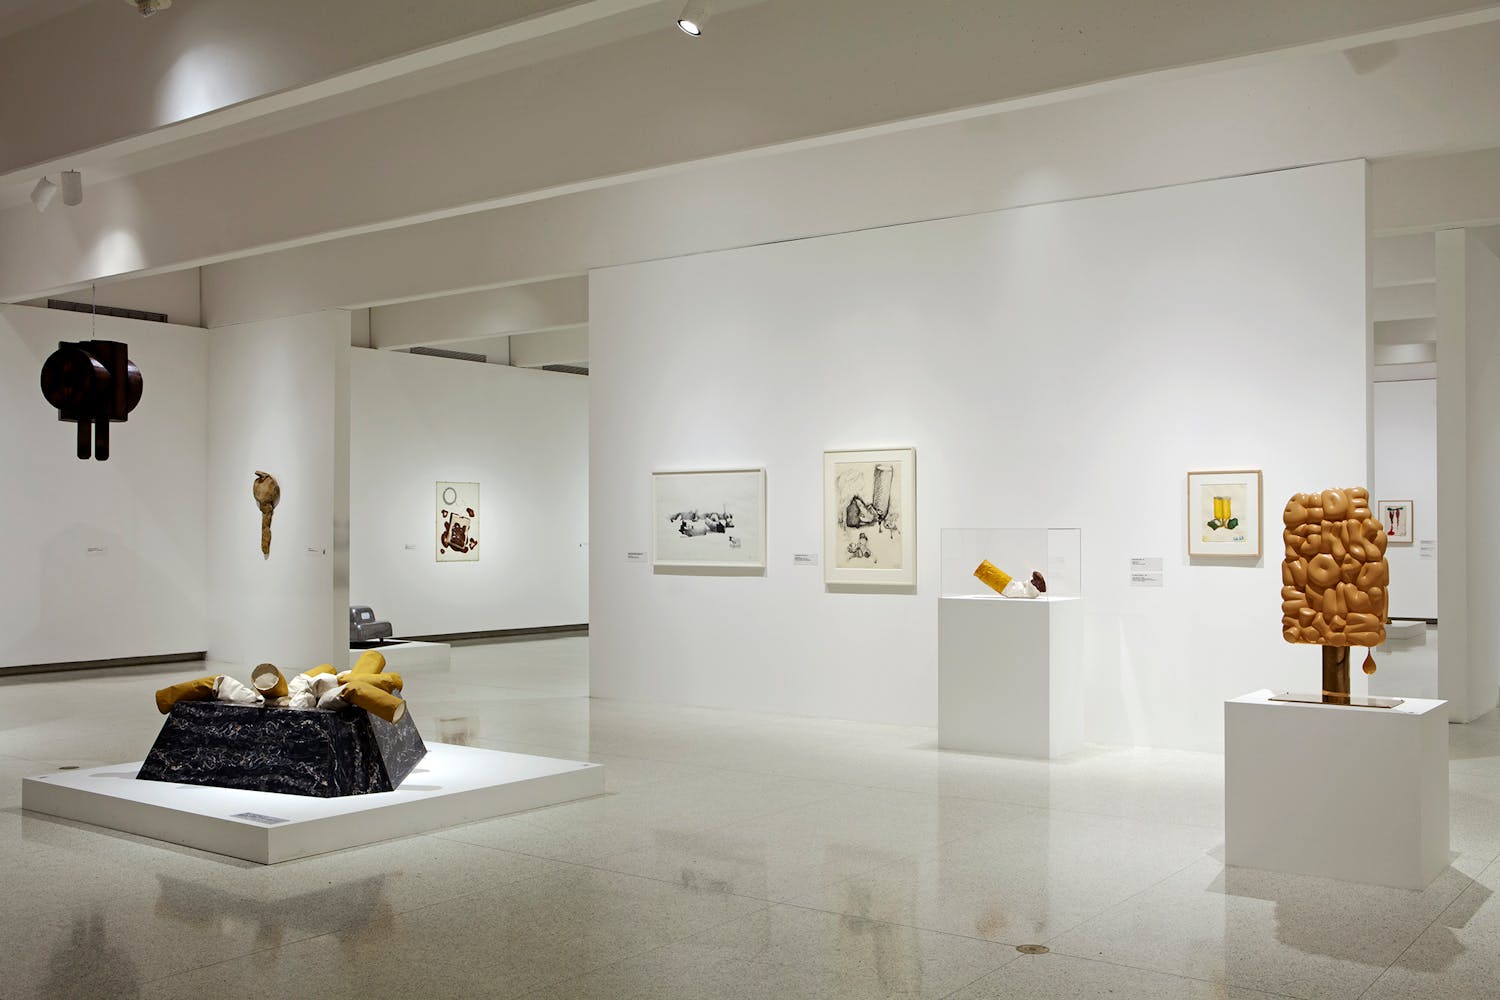 Installation view of the exhibition Claes Oldenburg: The Sixties, 2013